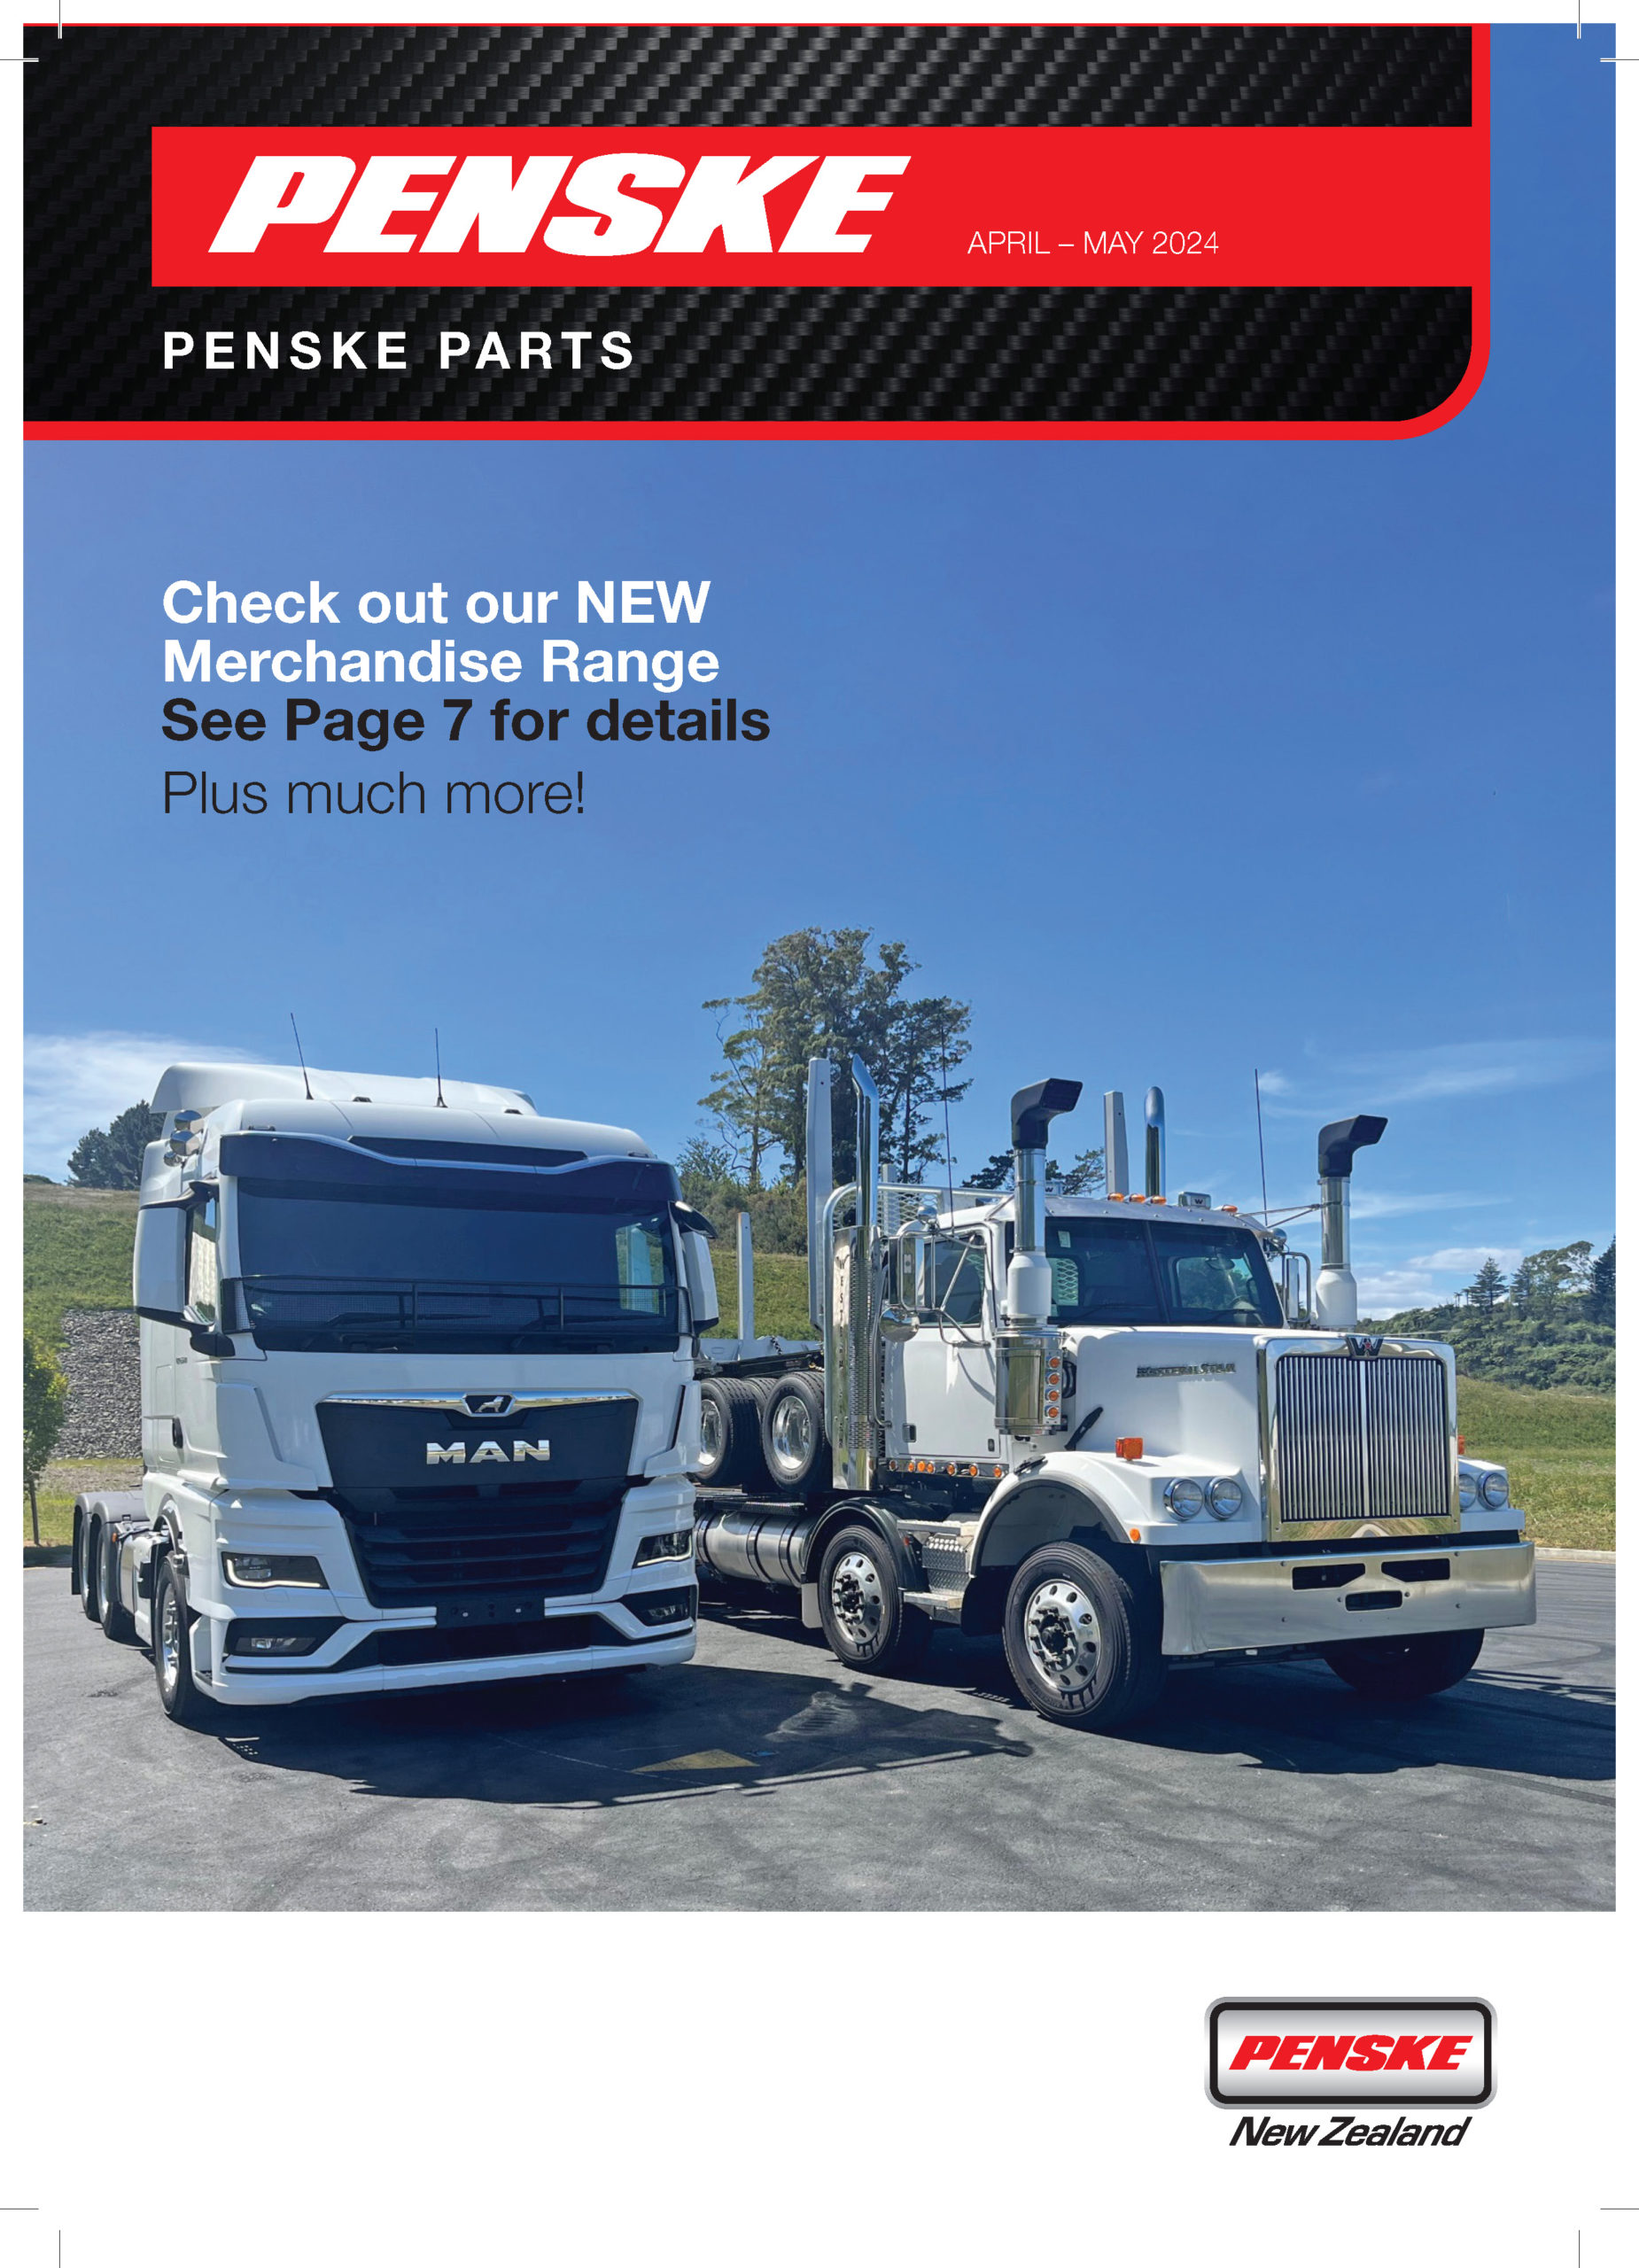 Penske New Zealand Parts and Service Promotions